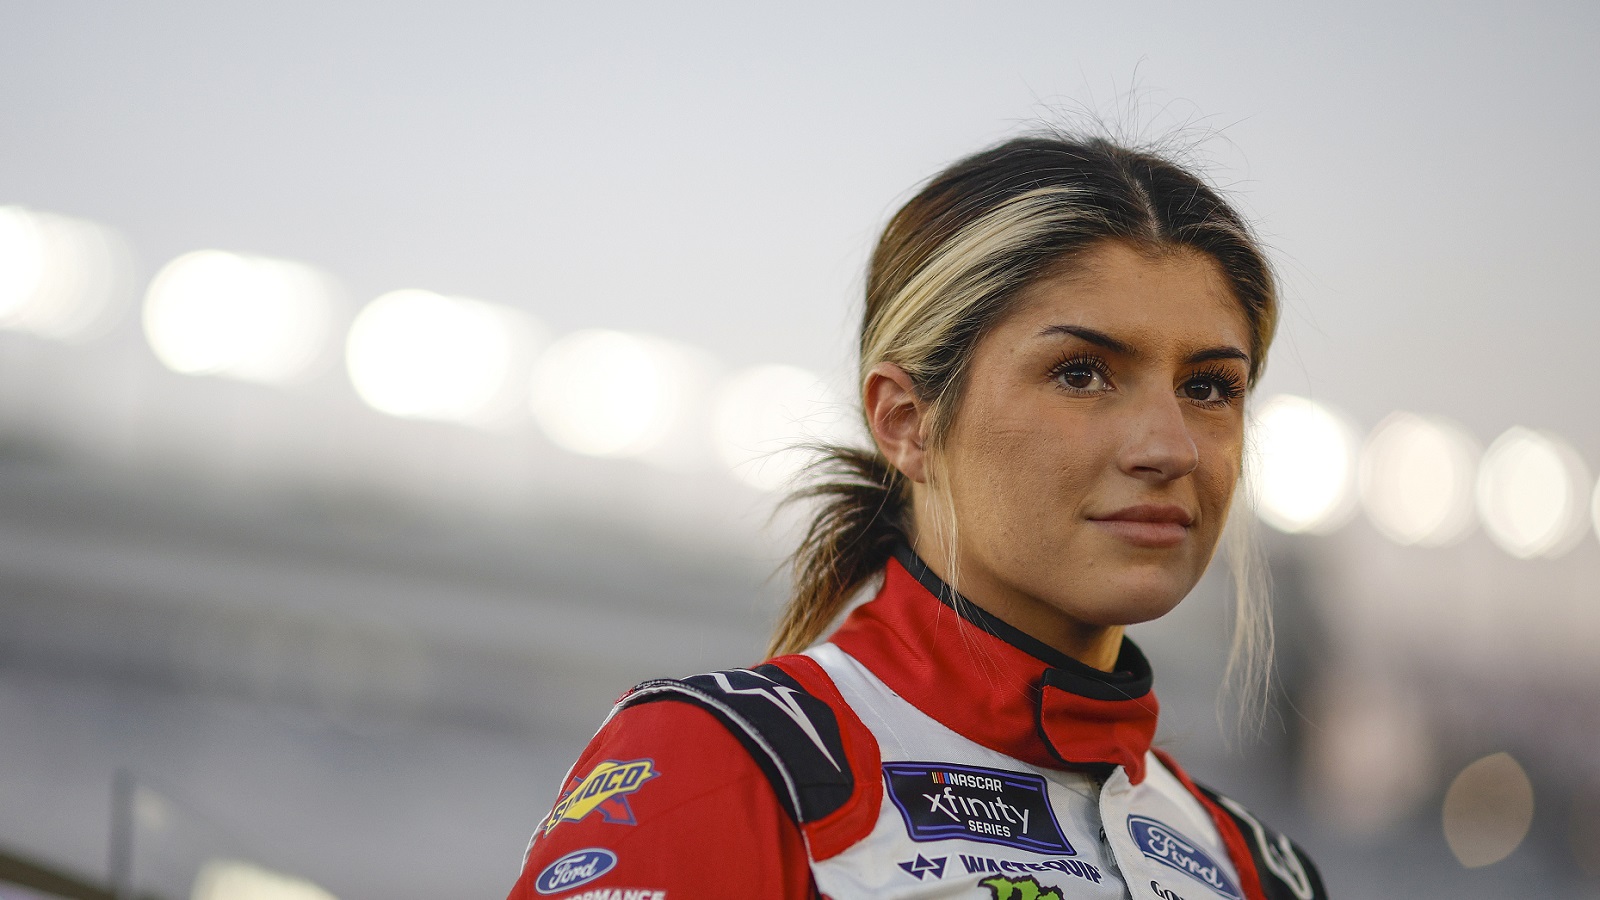 Hailie Deegan looks on during qualifying for the NASCAR Xfinity Series Alsco Uniforms 302 at Las Vegas Motor Speedway on Oct. 14, 2022.